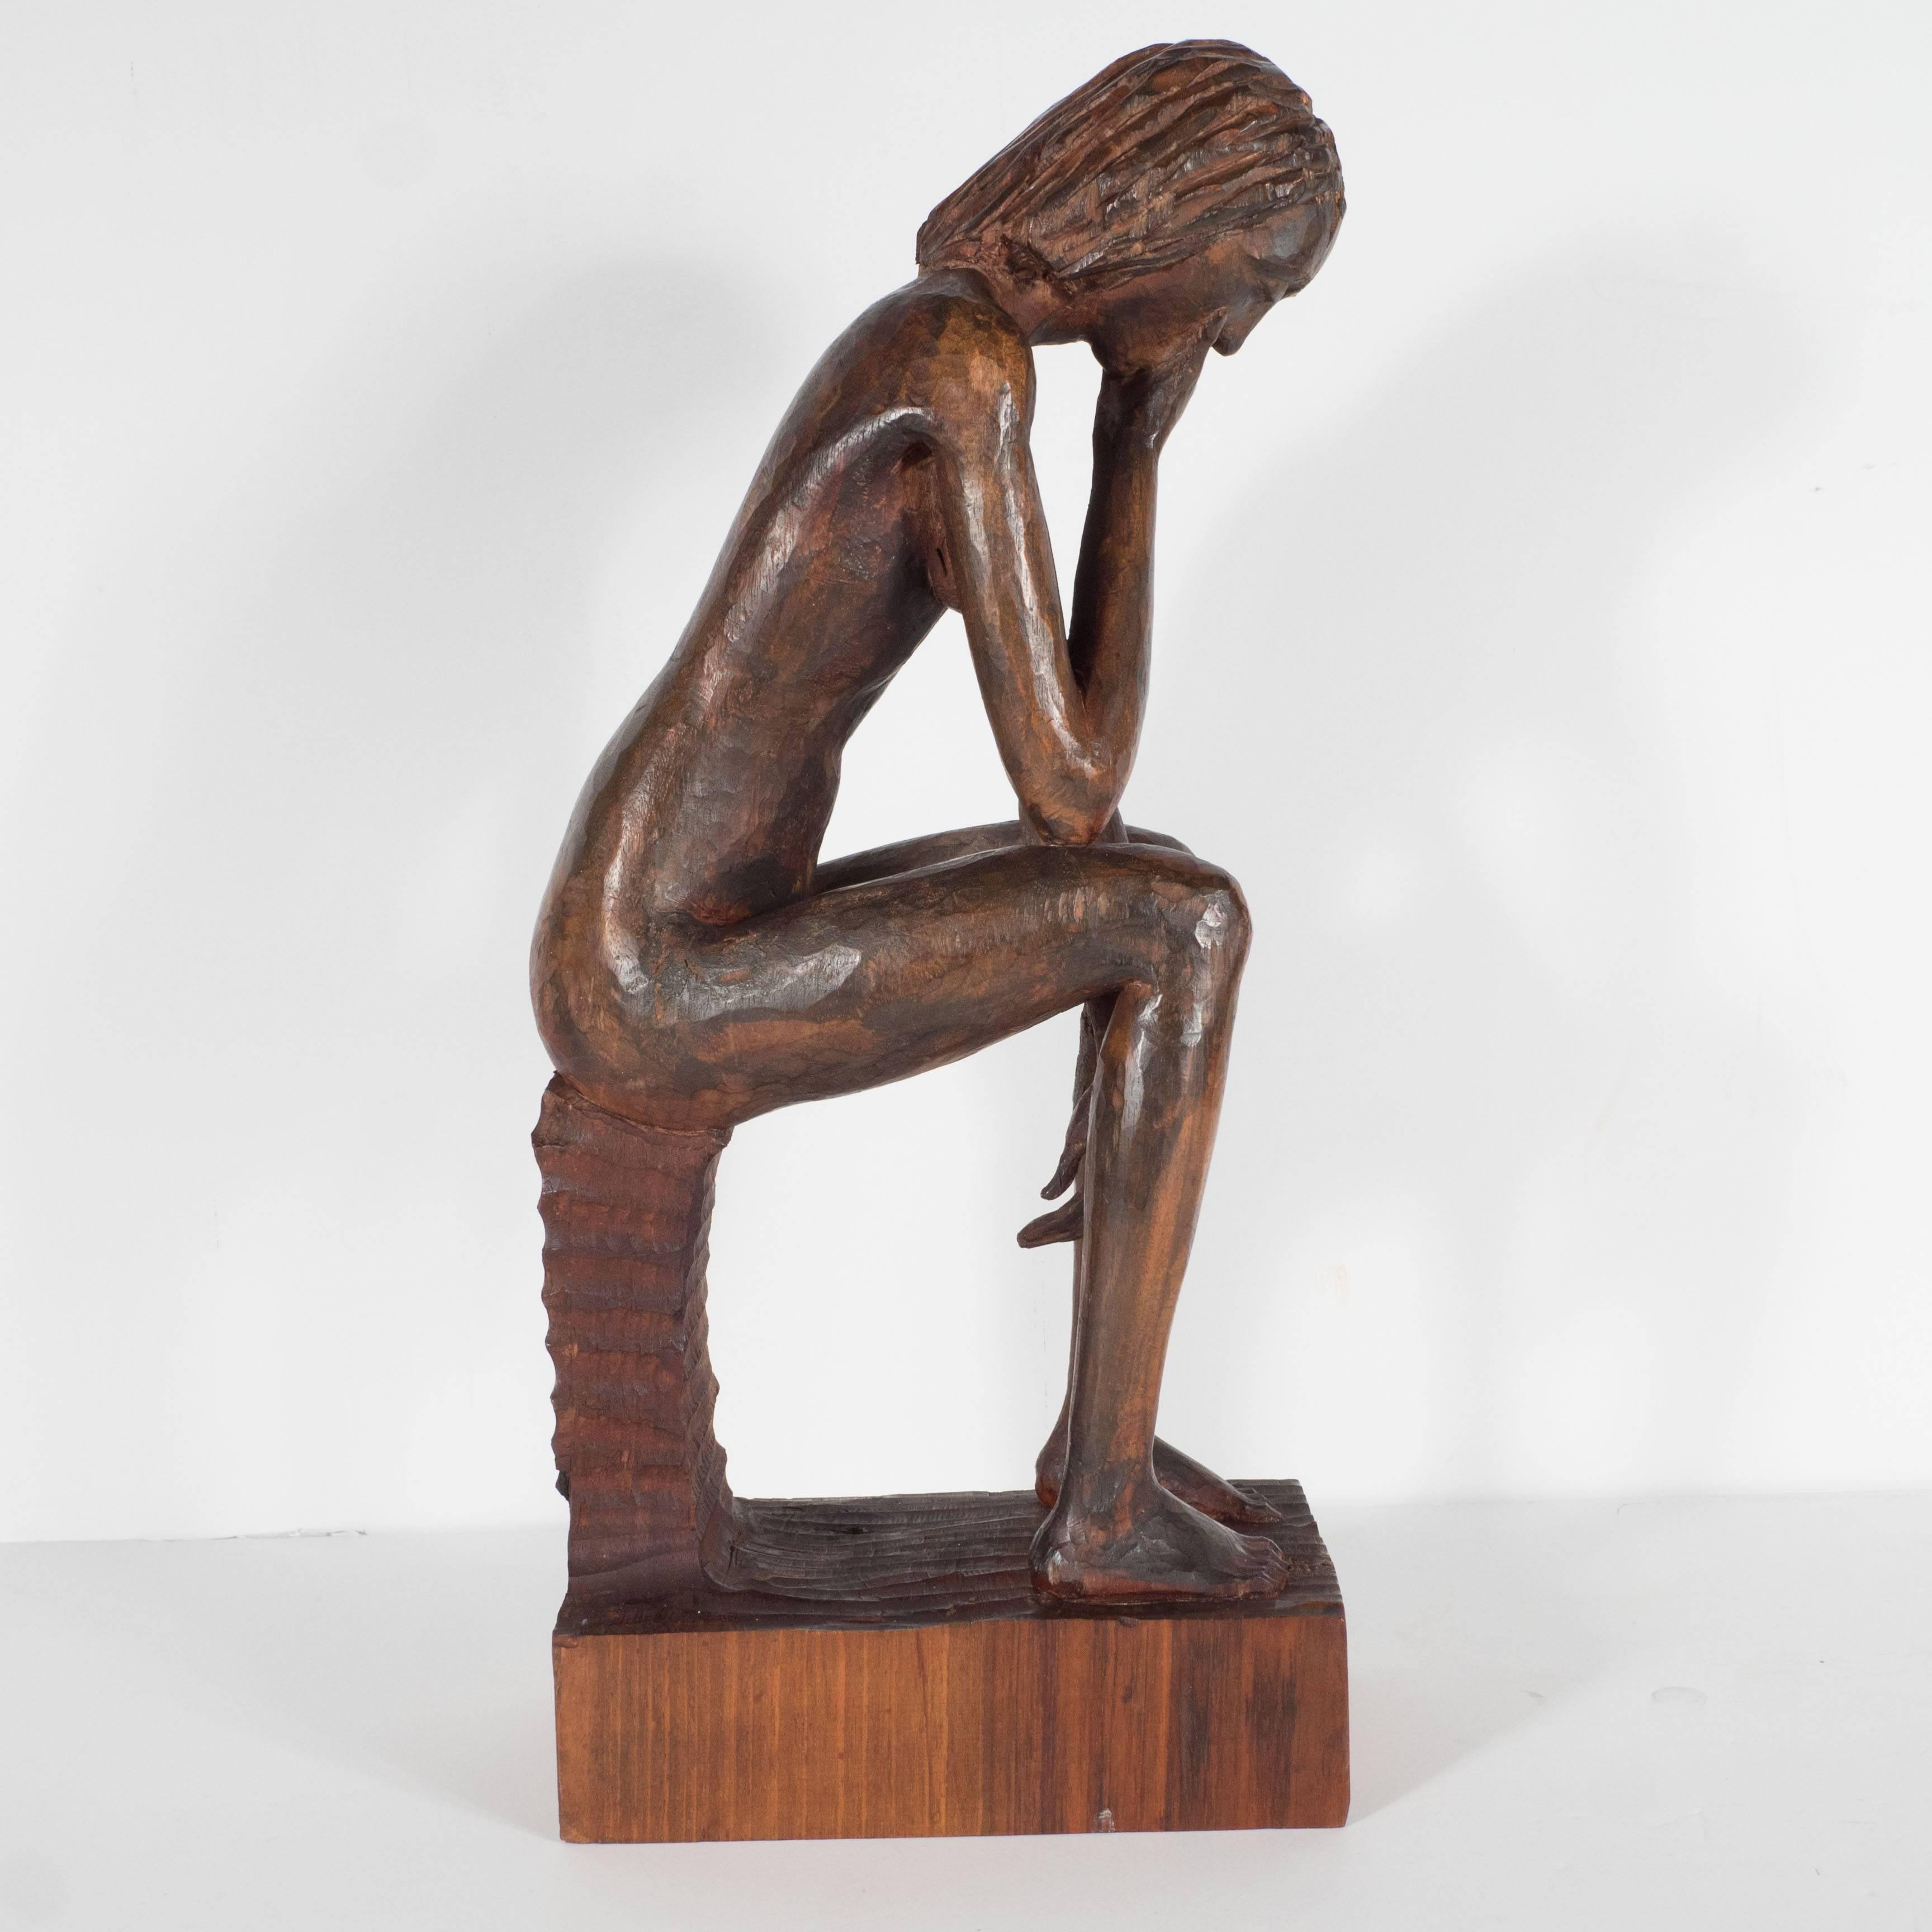 Hand-Carved Wood Contemplative Seated Nude Sculpture by Aldo Calo For Sale 1